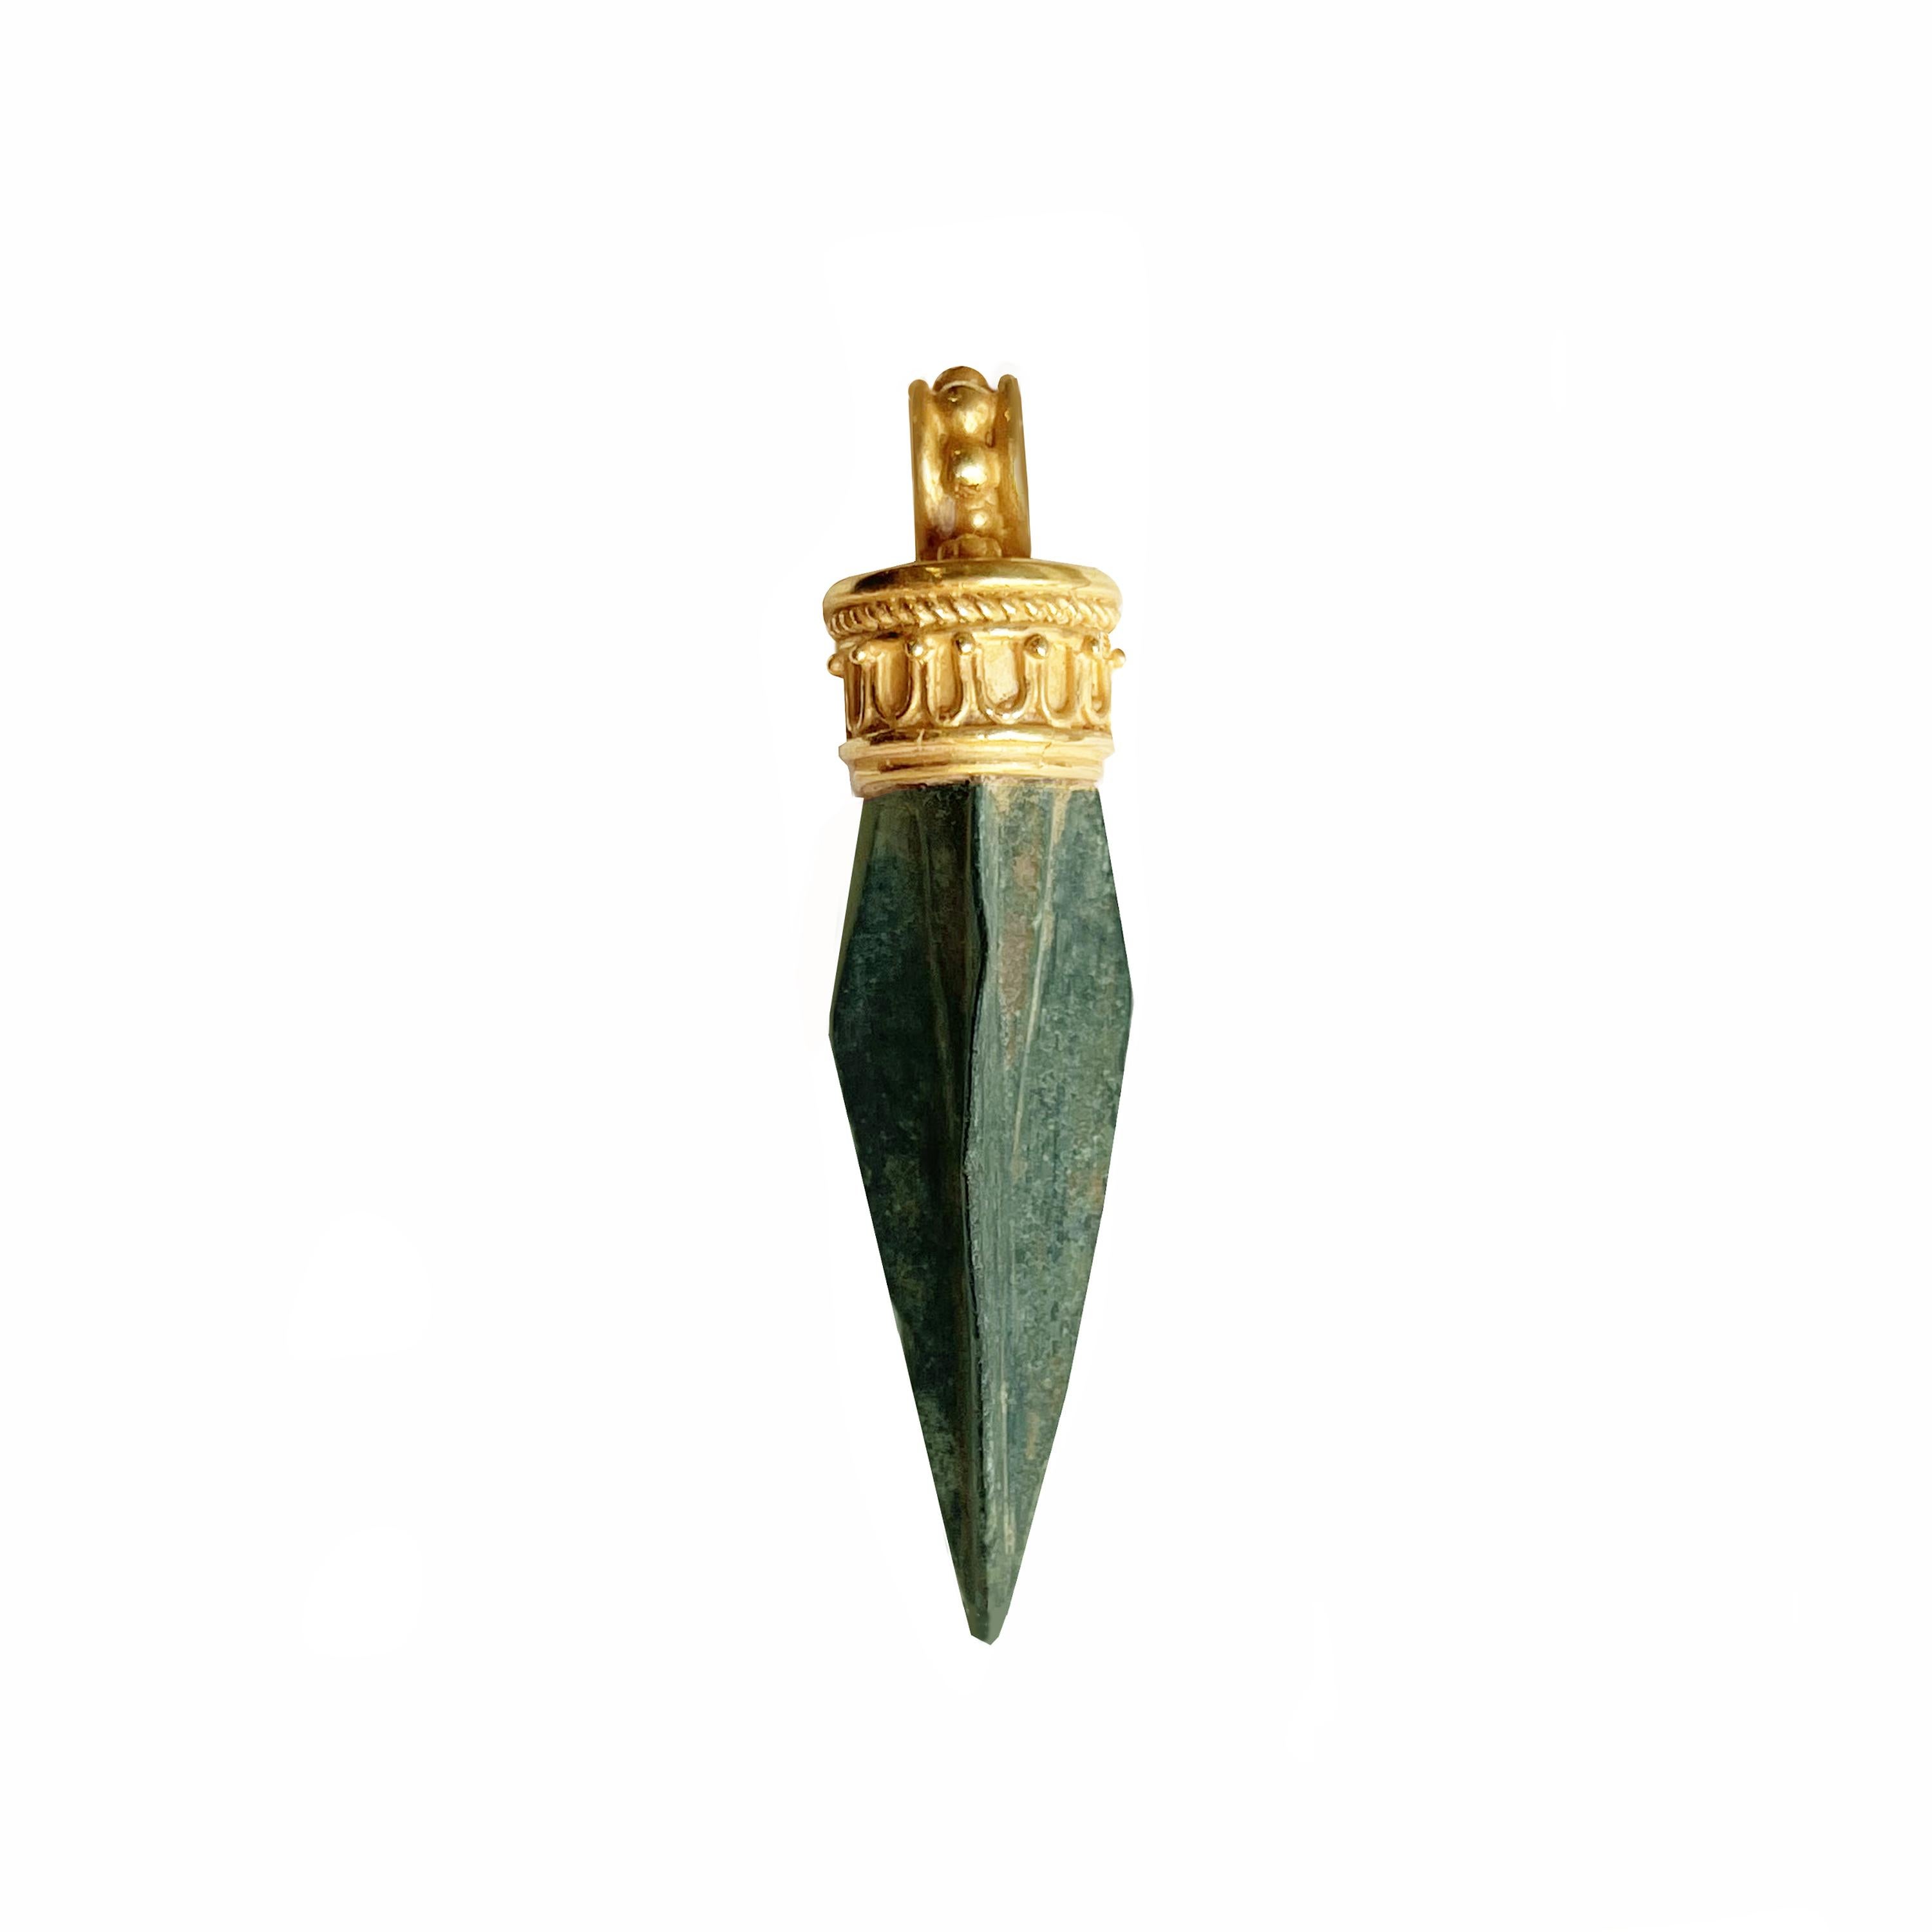 Small bronze arrowhead, olive-green patina,similar to examples found in the 